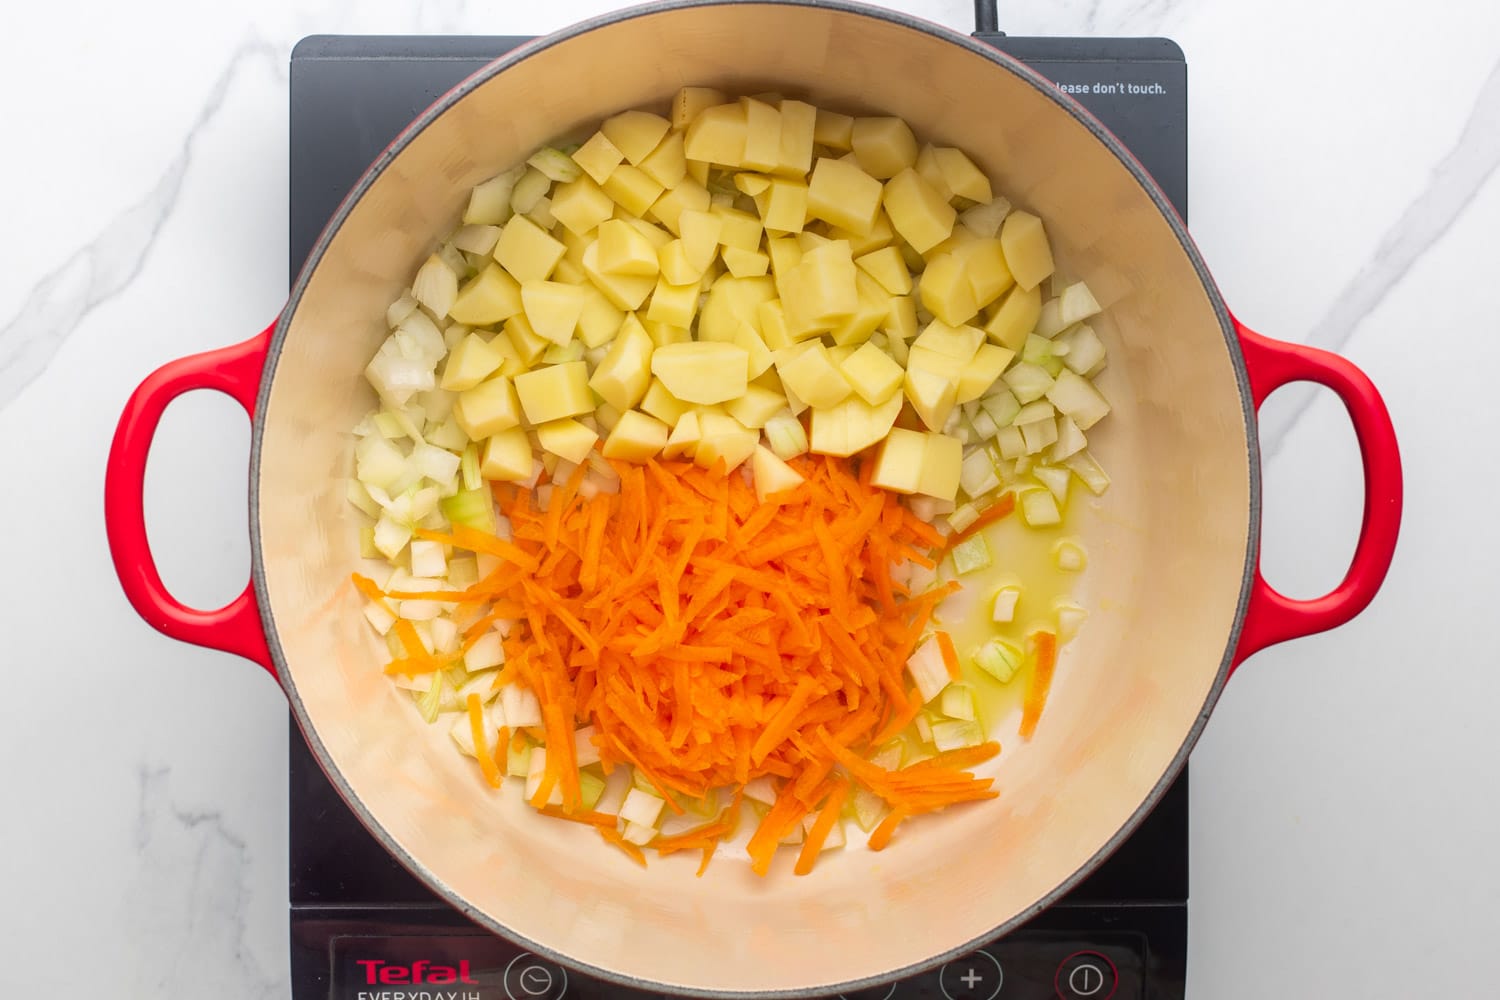 a dutch oven on an electric burner holding oil, shredded carrot, diced potato, diced onions.